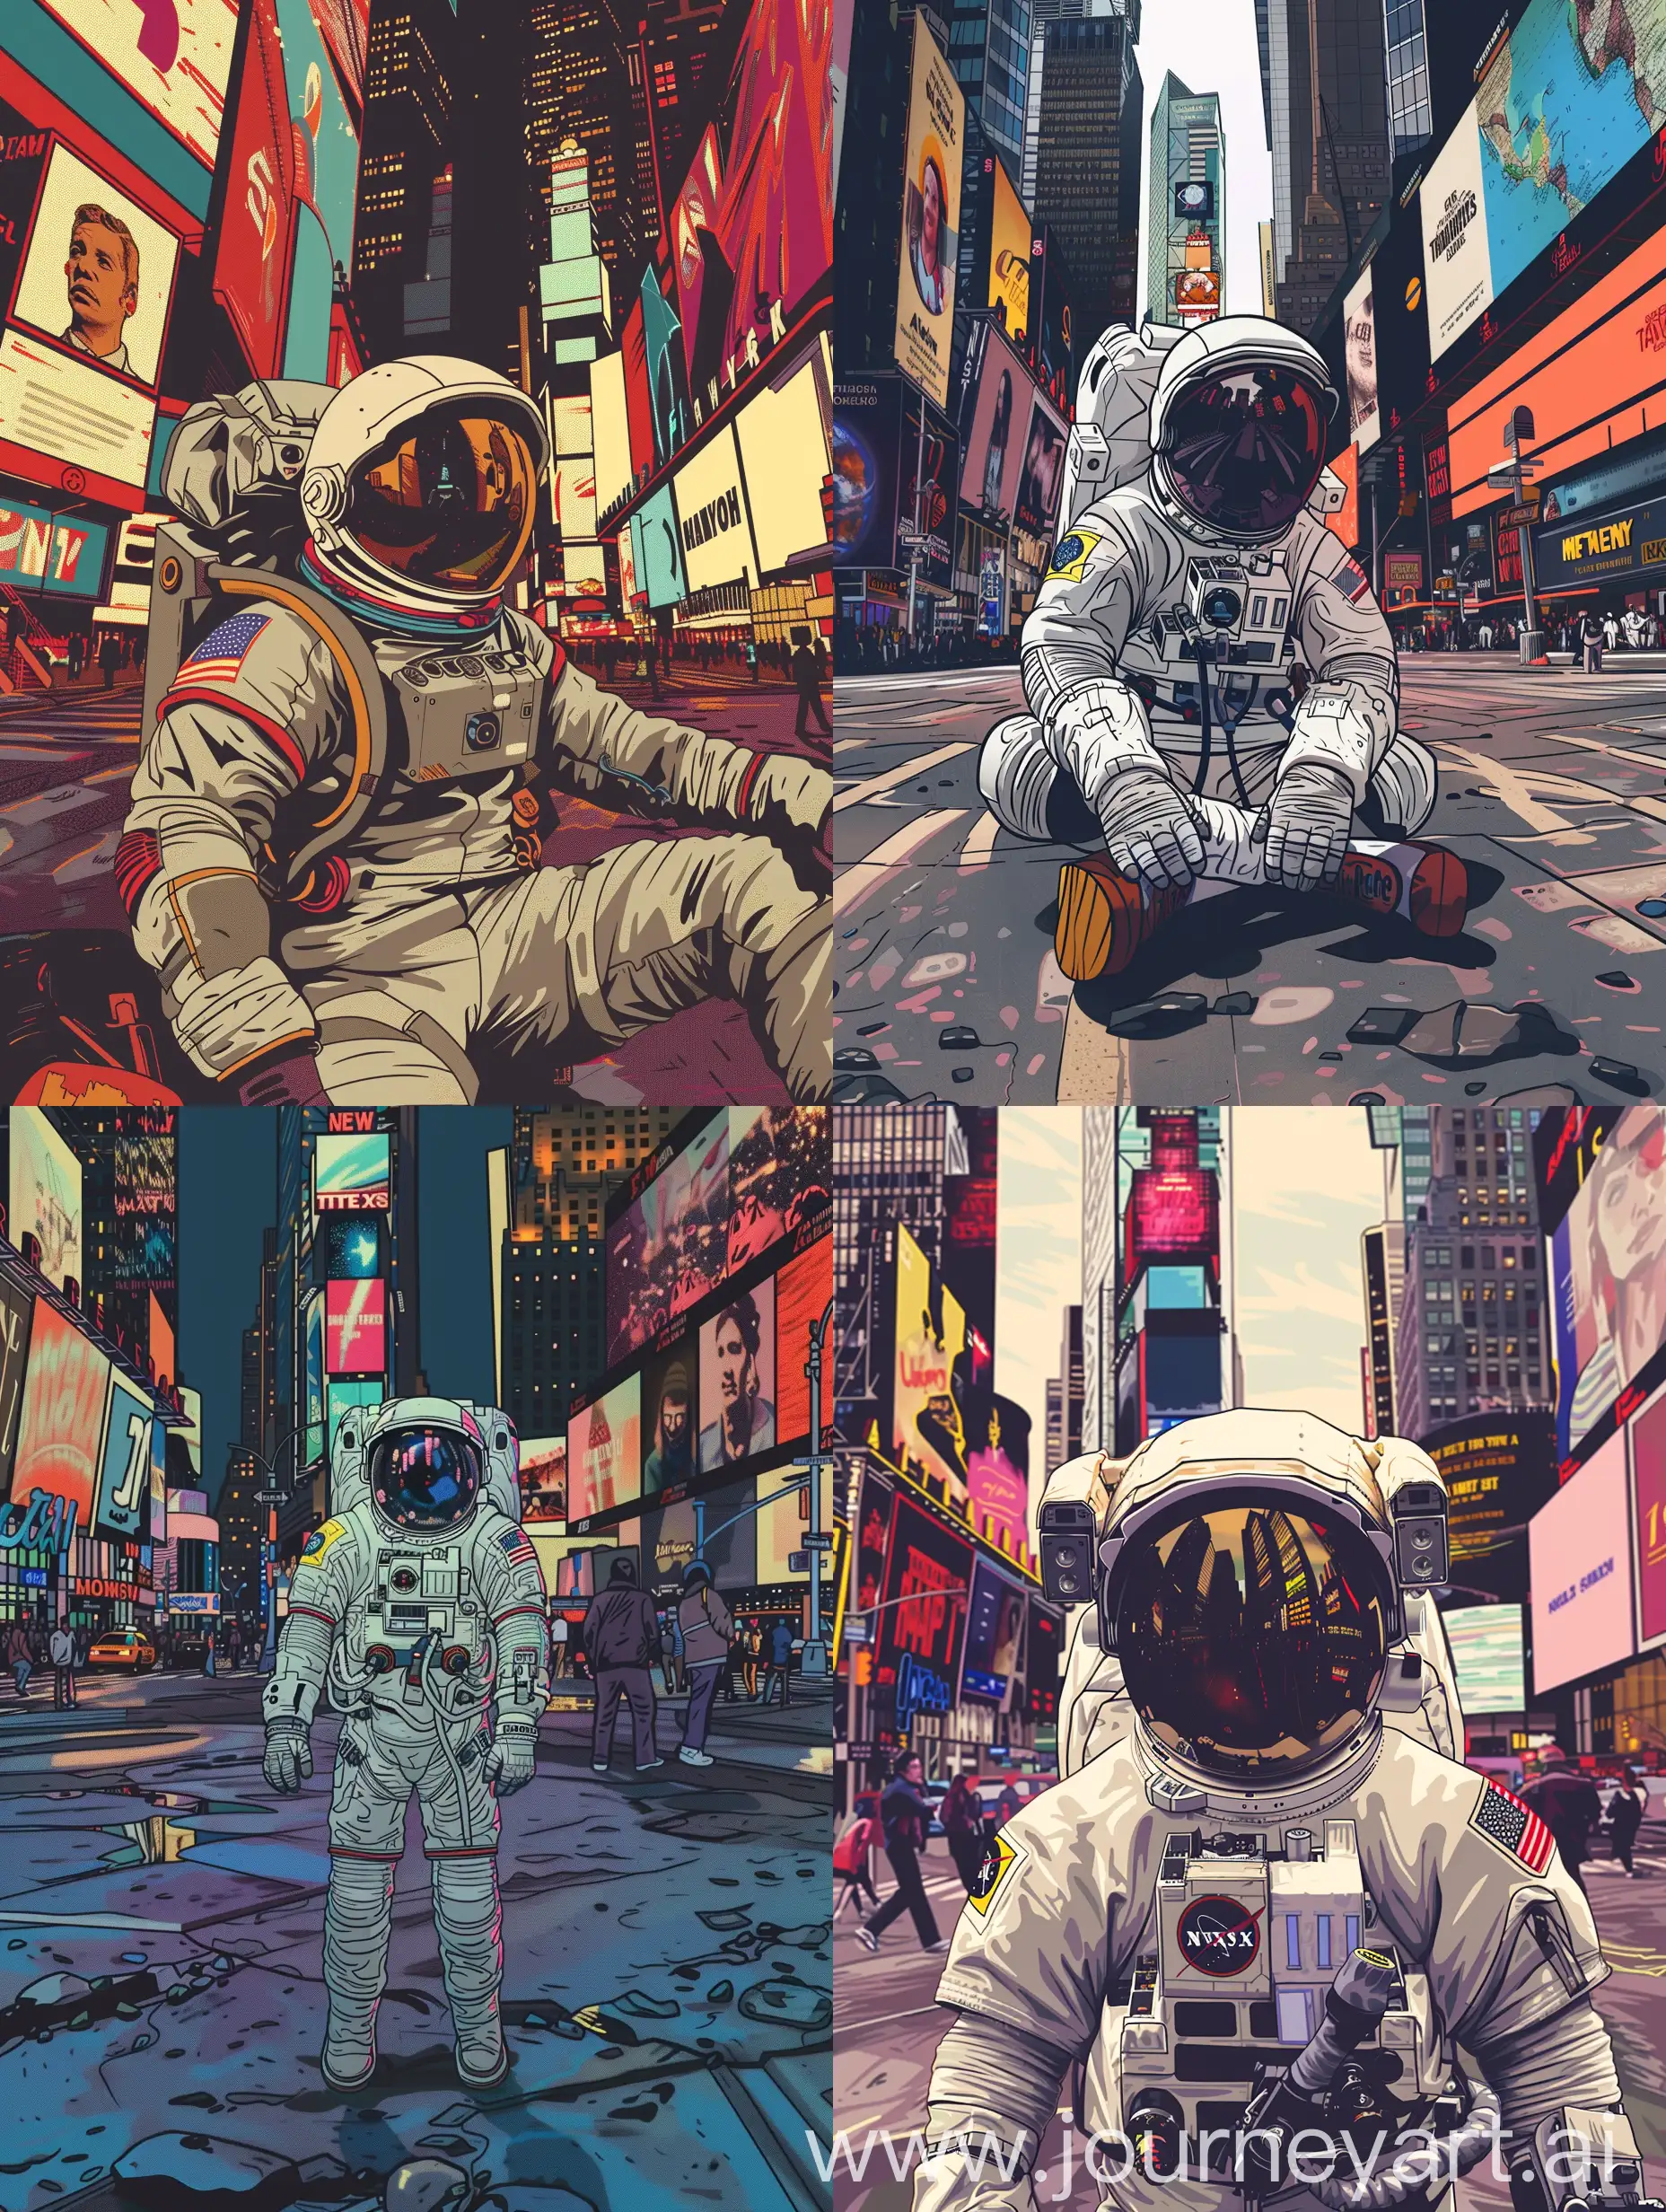 Lost-Astronaut-in-Times-Square-New-York-Urban-Isolation-and-Wonder